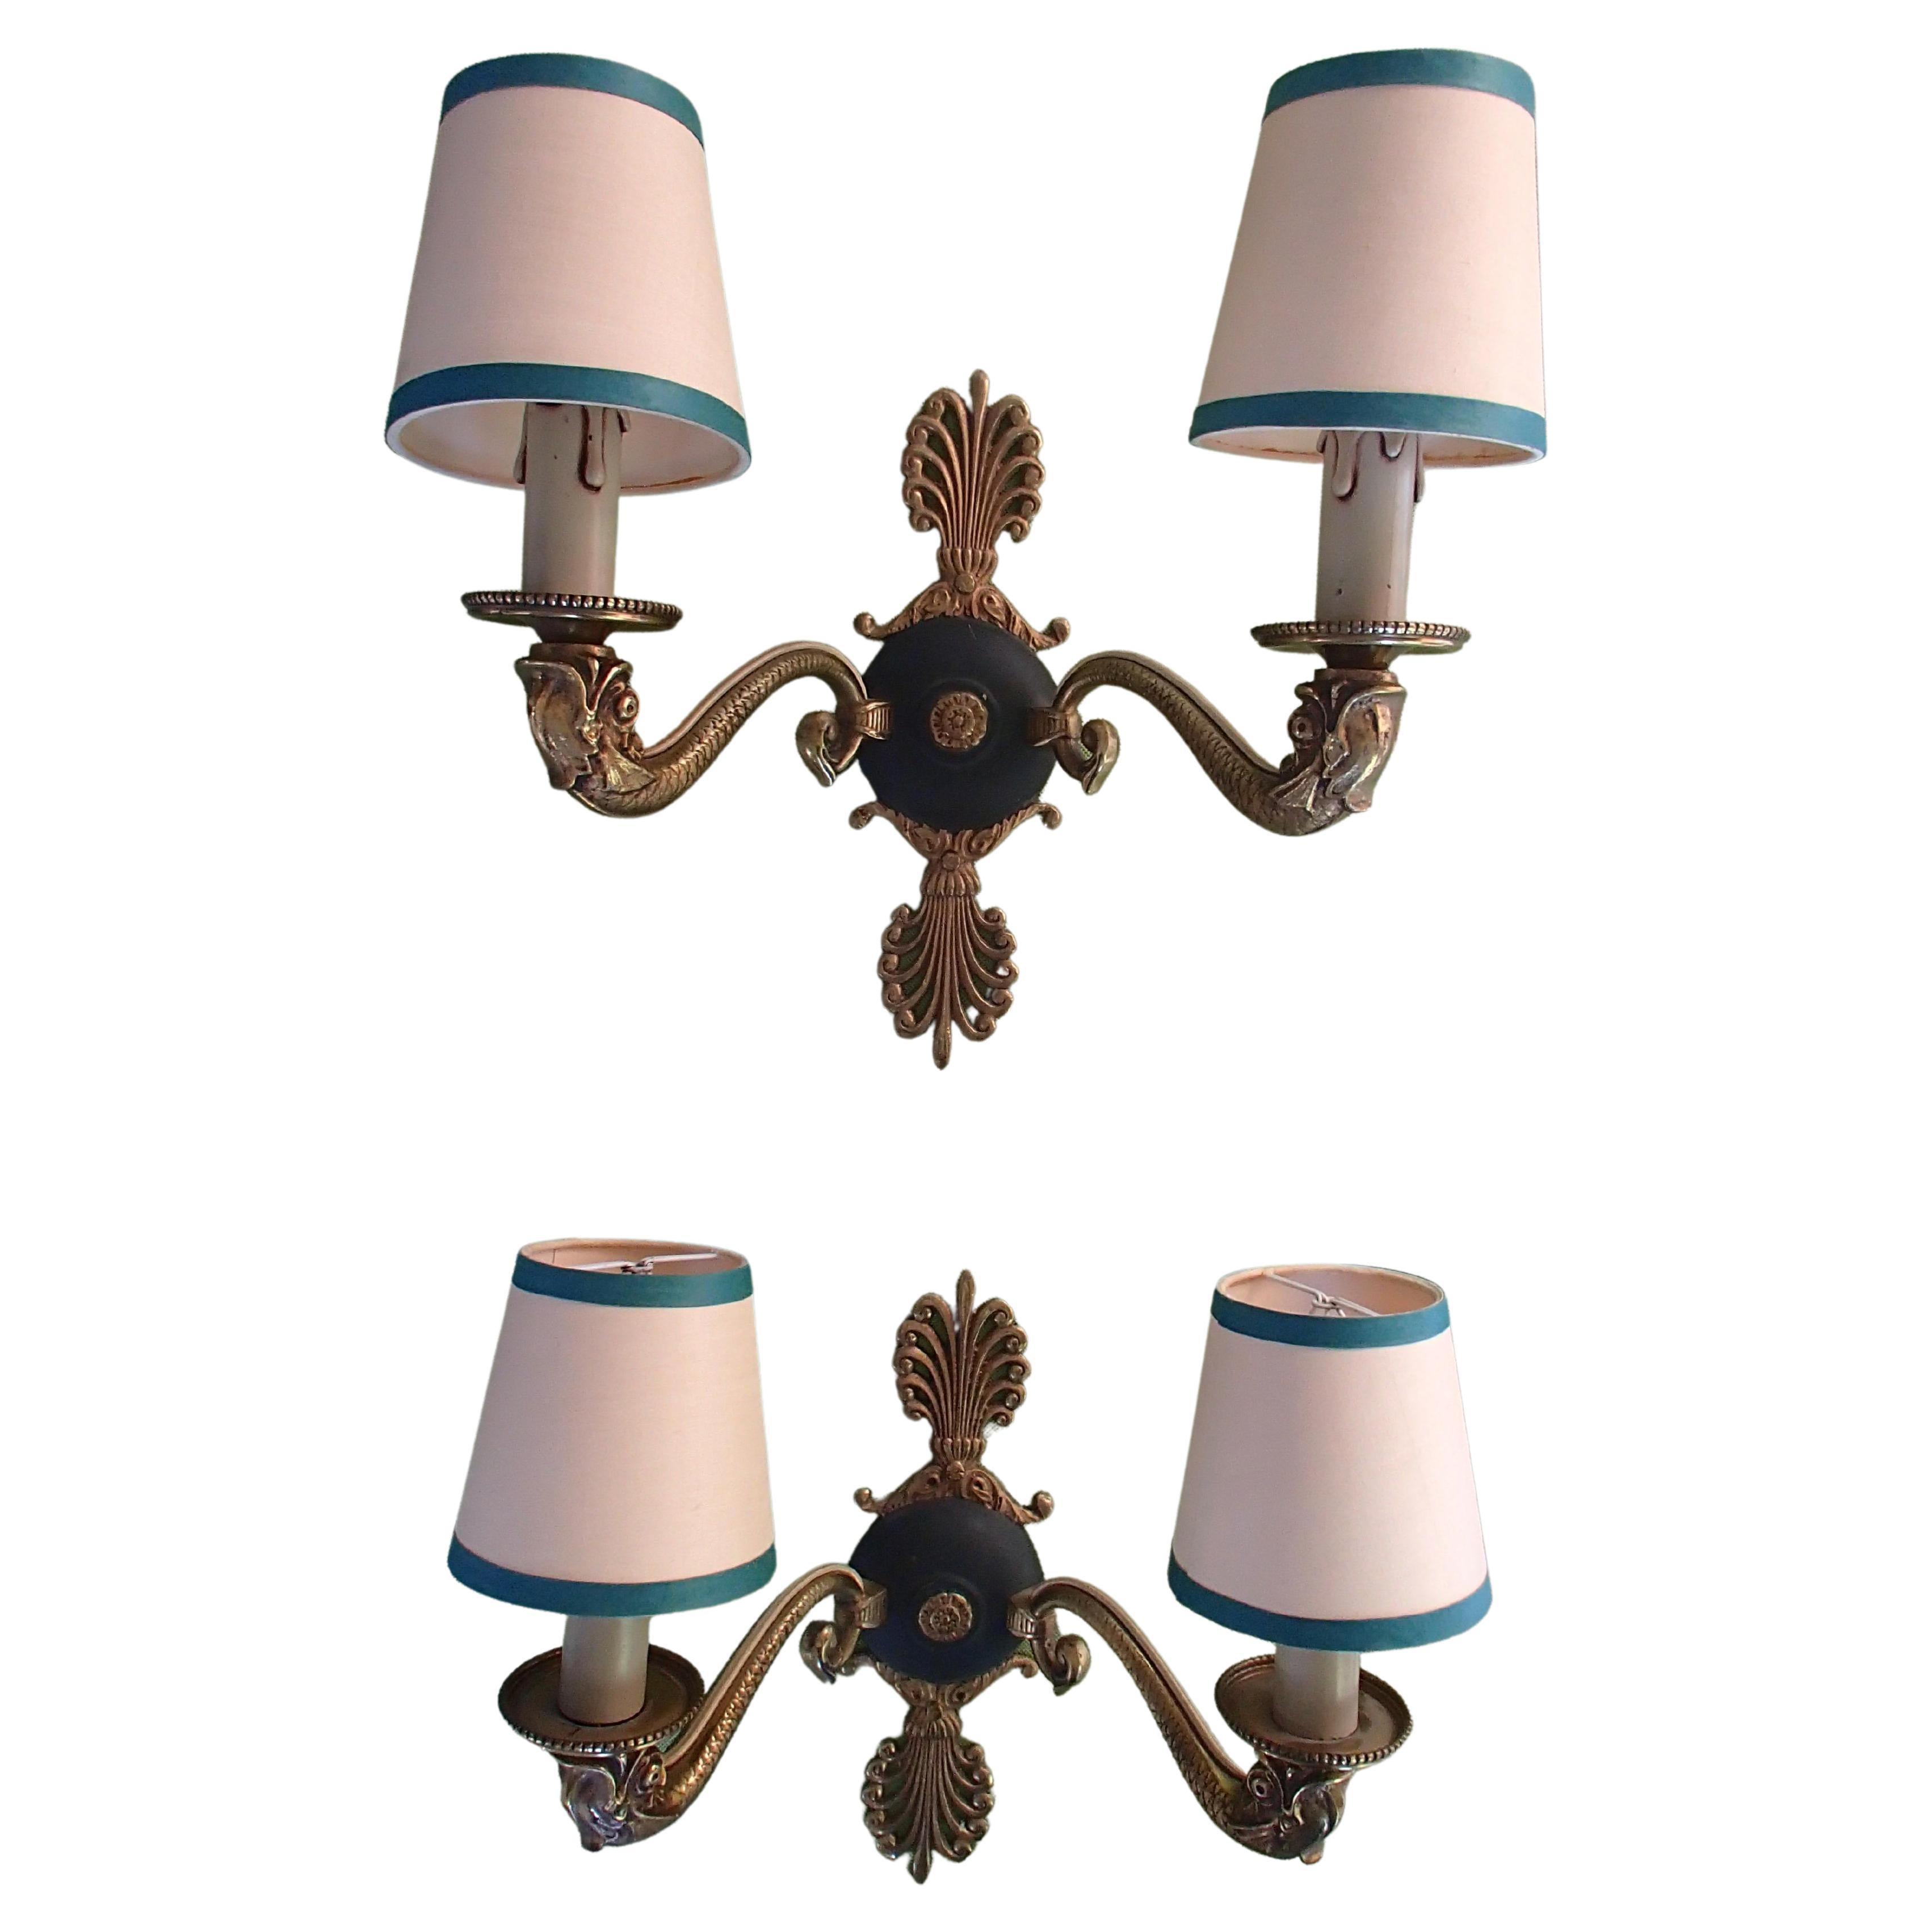 Pair of Bronze and Green Empire Wall Lights with Beige/Green Shades For Sale